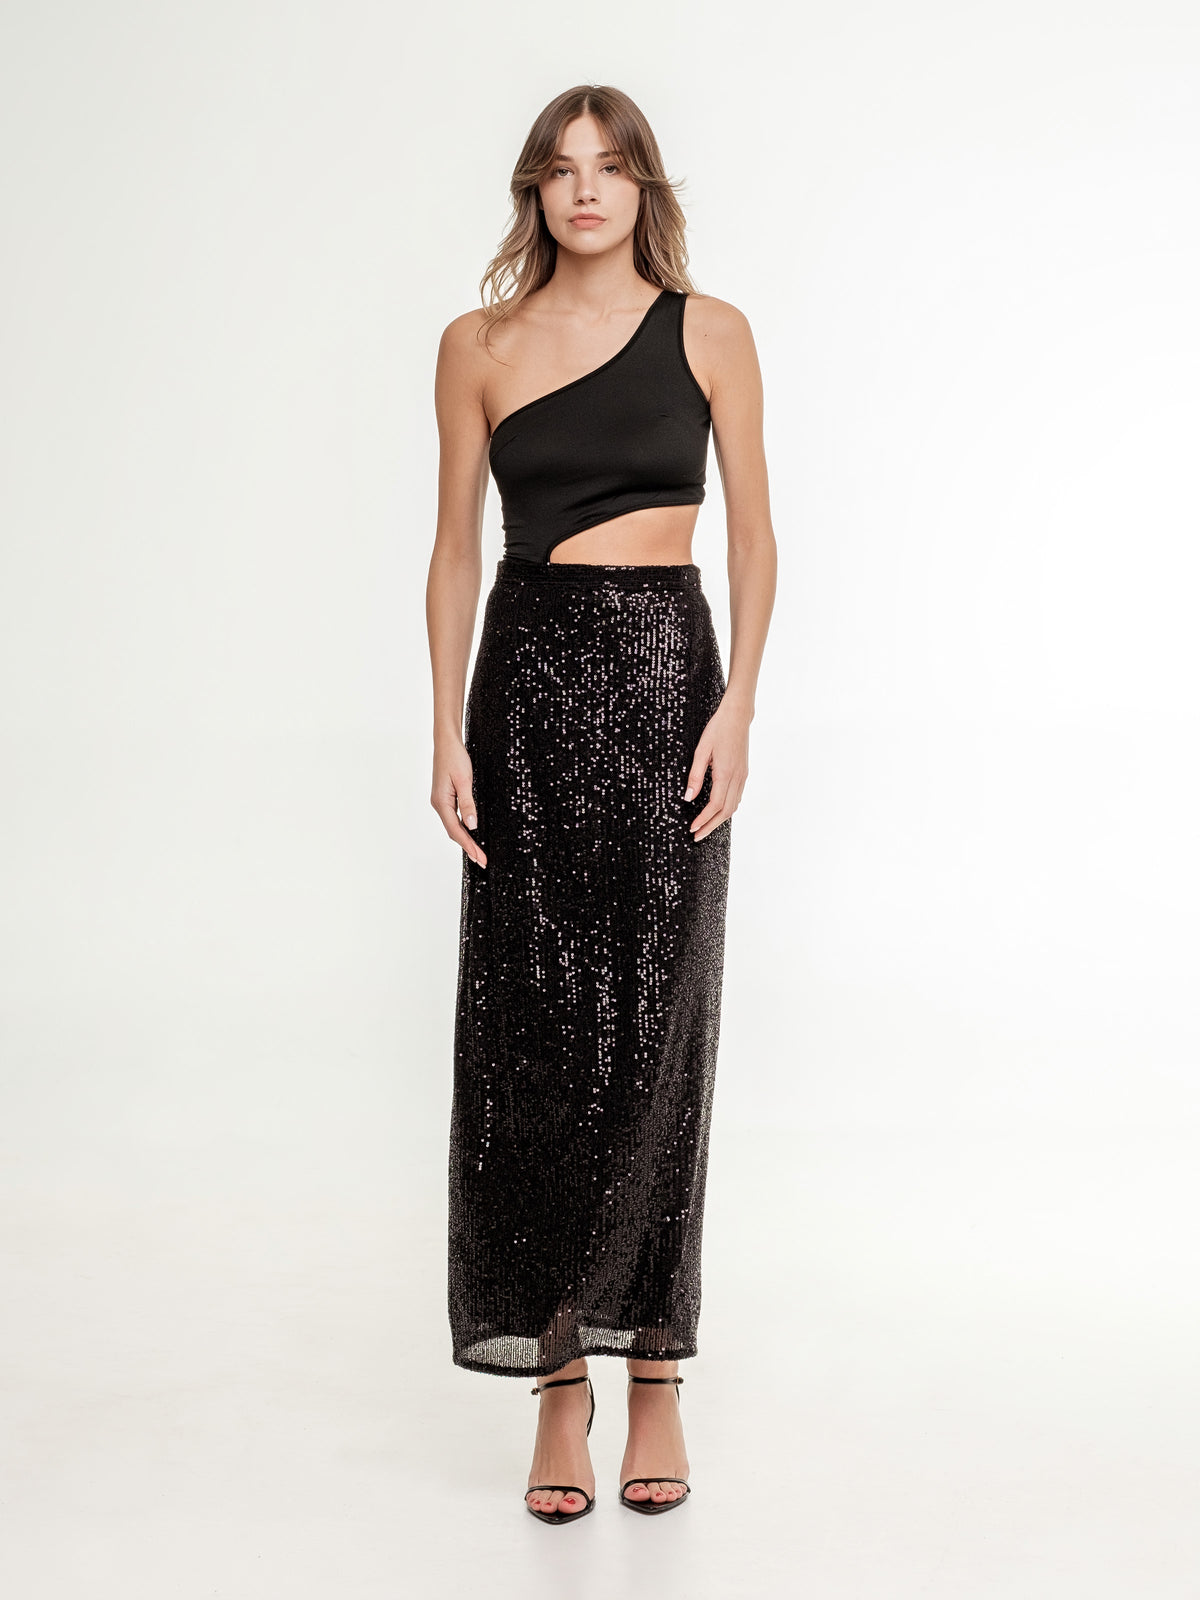 glitter black long skirt view from the front on the model